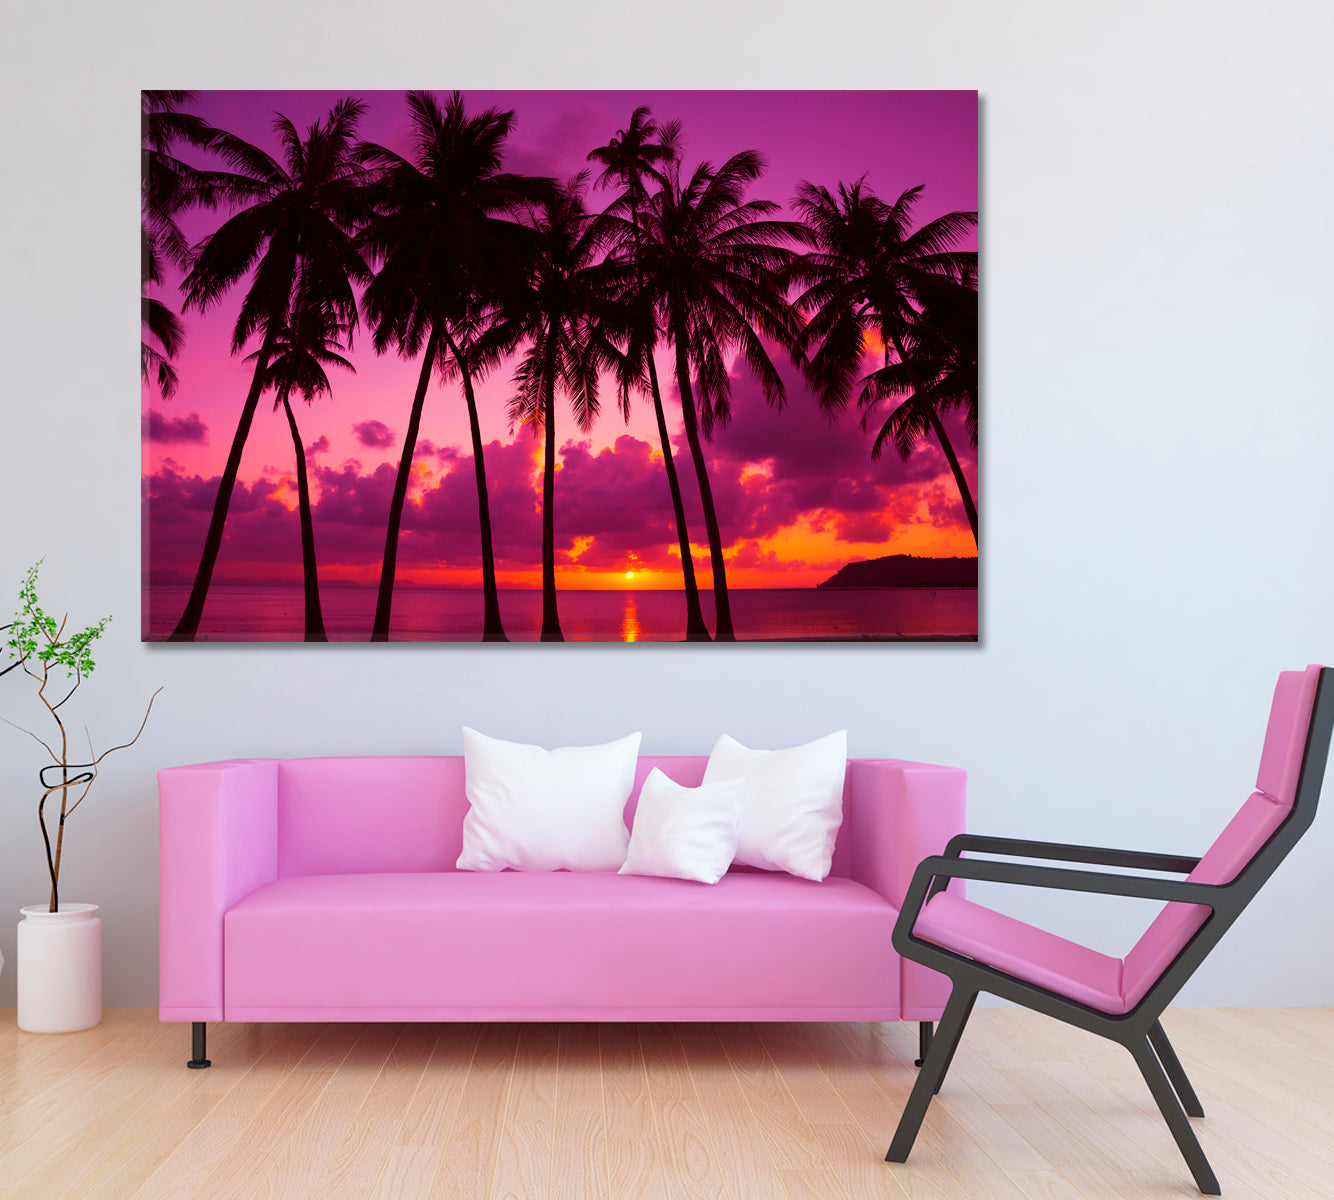 Palm Trees Silhouette at Sunset Thailand Canvas Print ArtLexy 1 Panel 24"x16" inches 